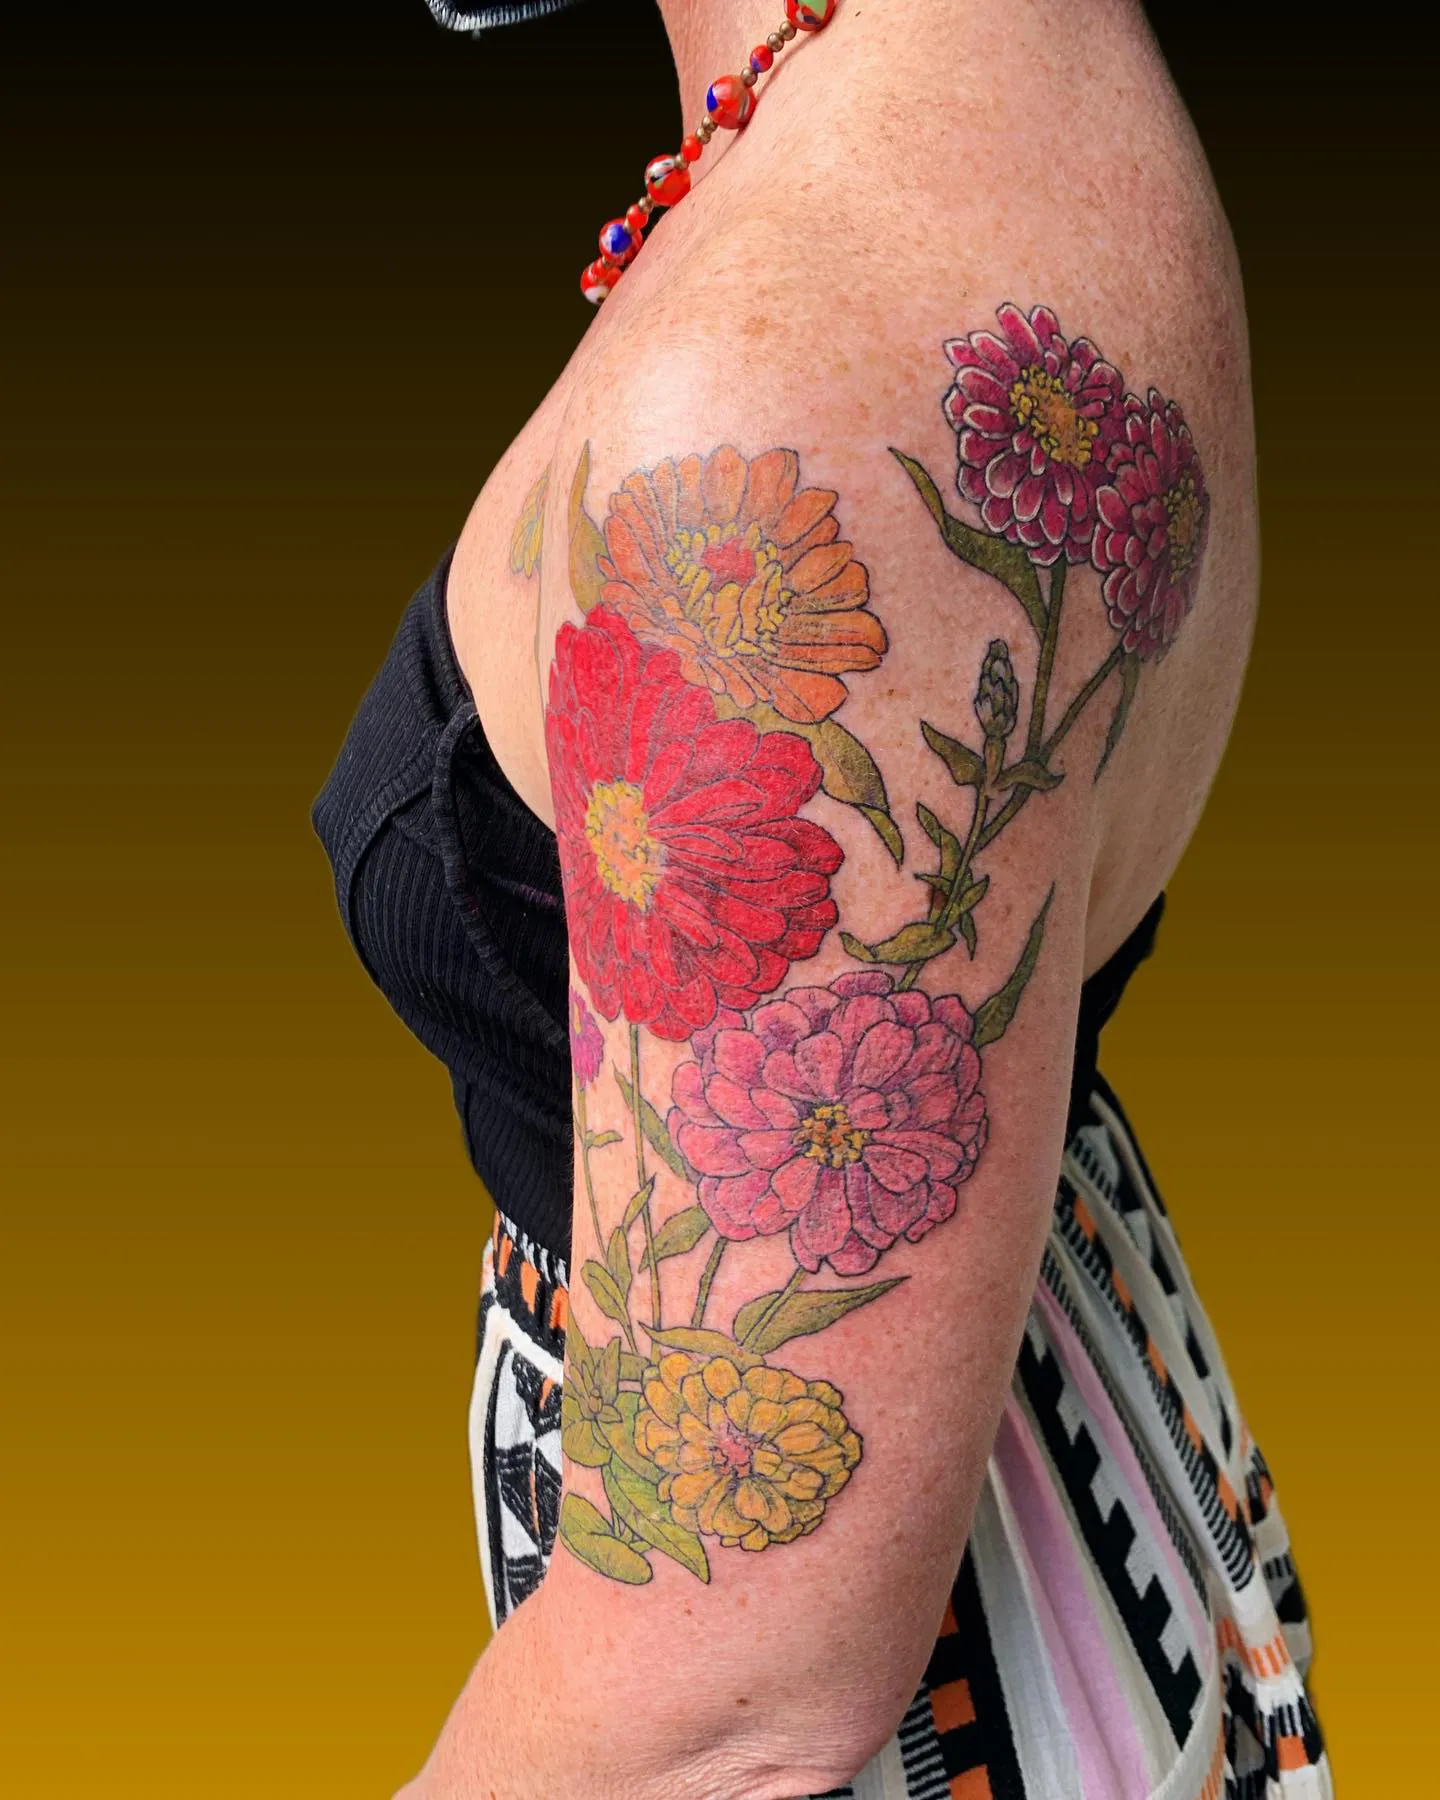 Arm tattoo with delicate zinnia flowers